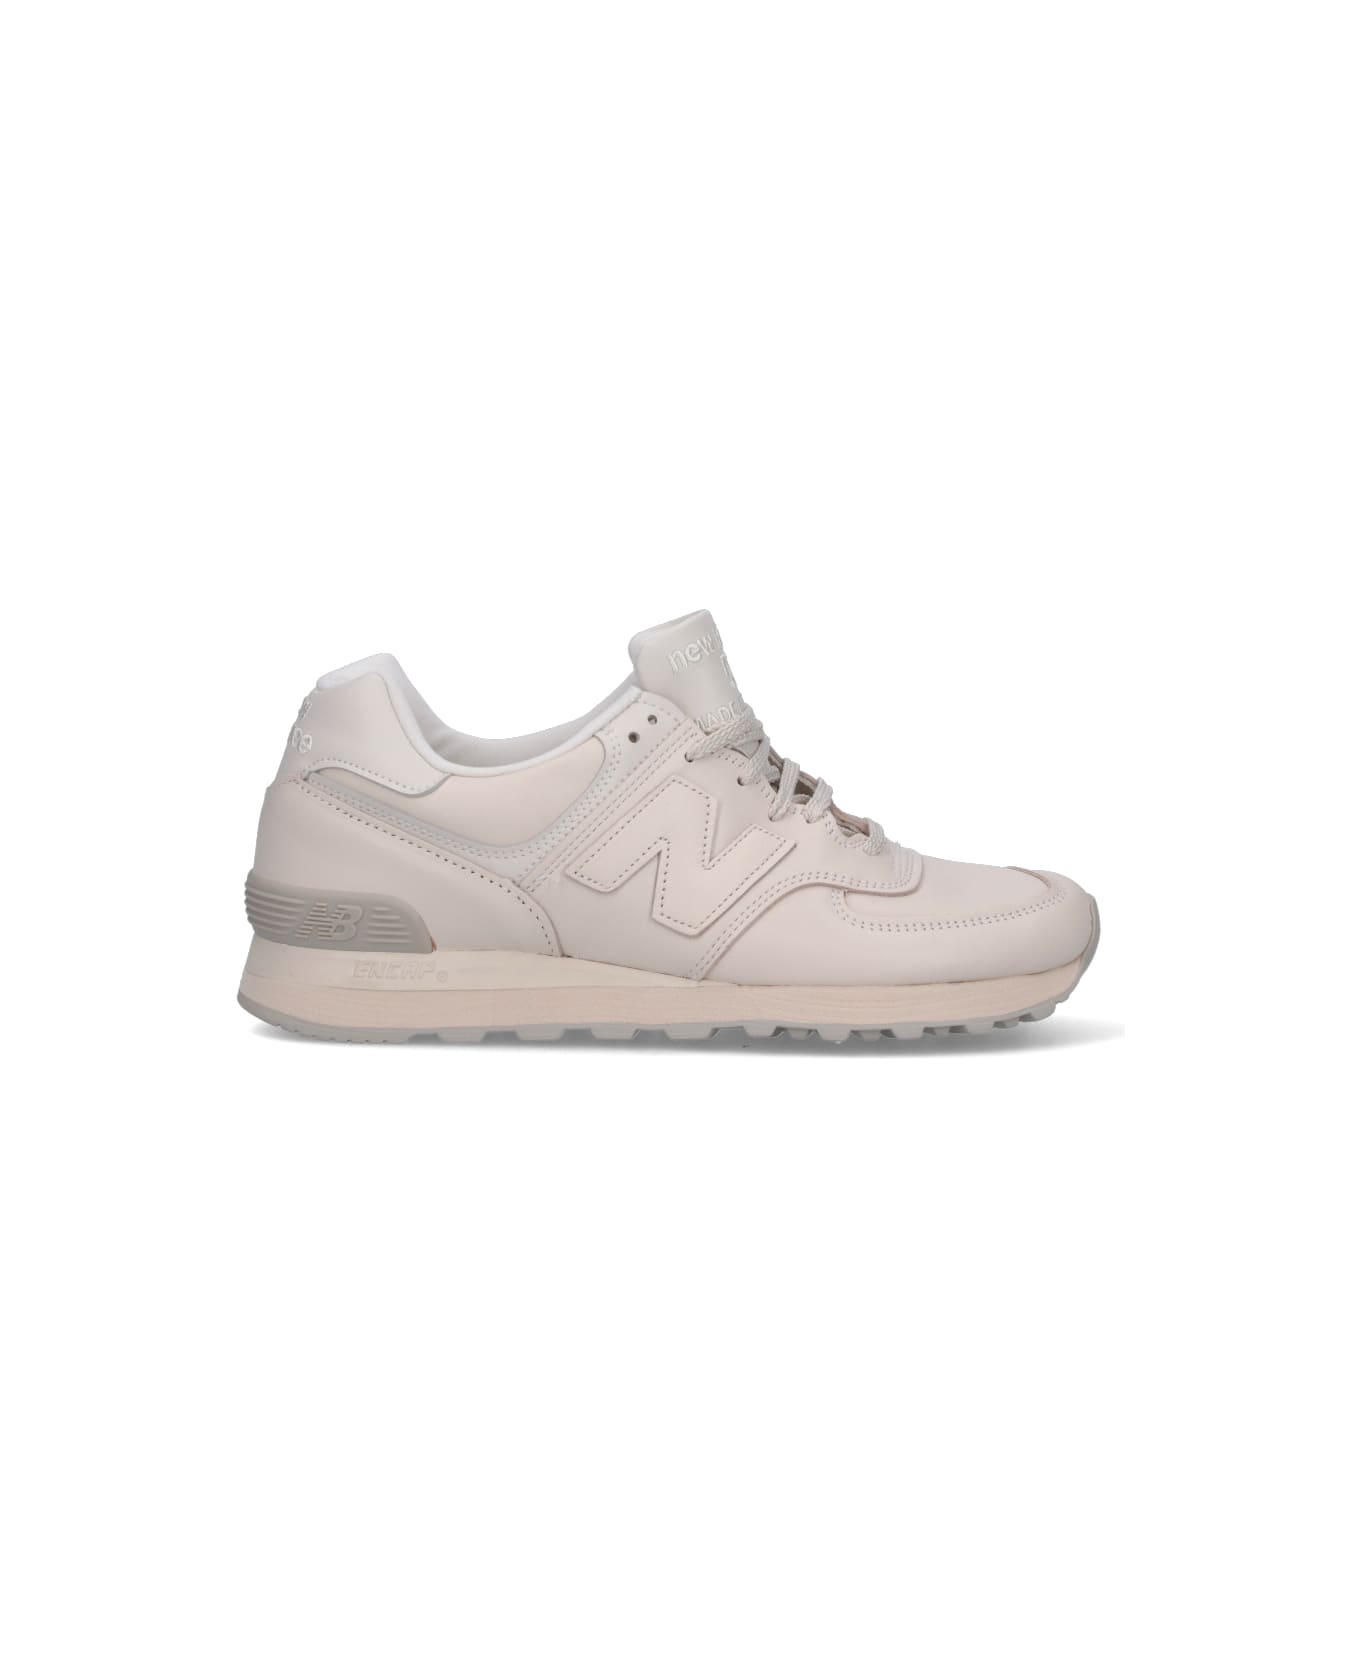 New Balance 'made In Uk 576' Sneakers - Crema スニーカー